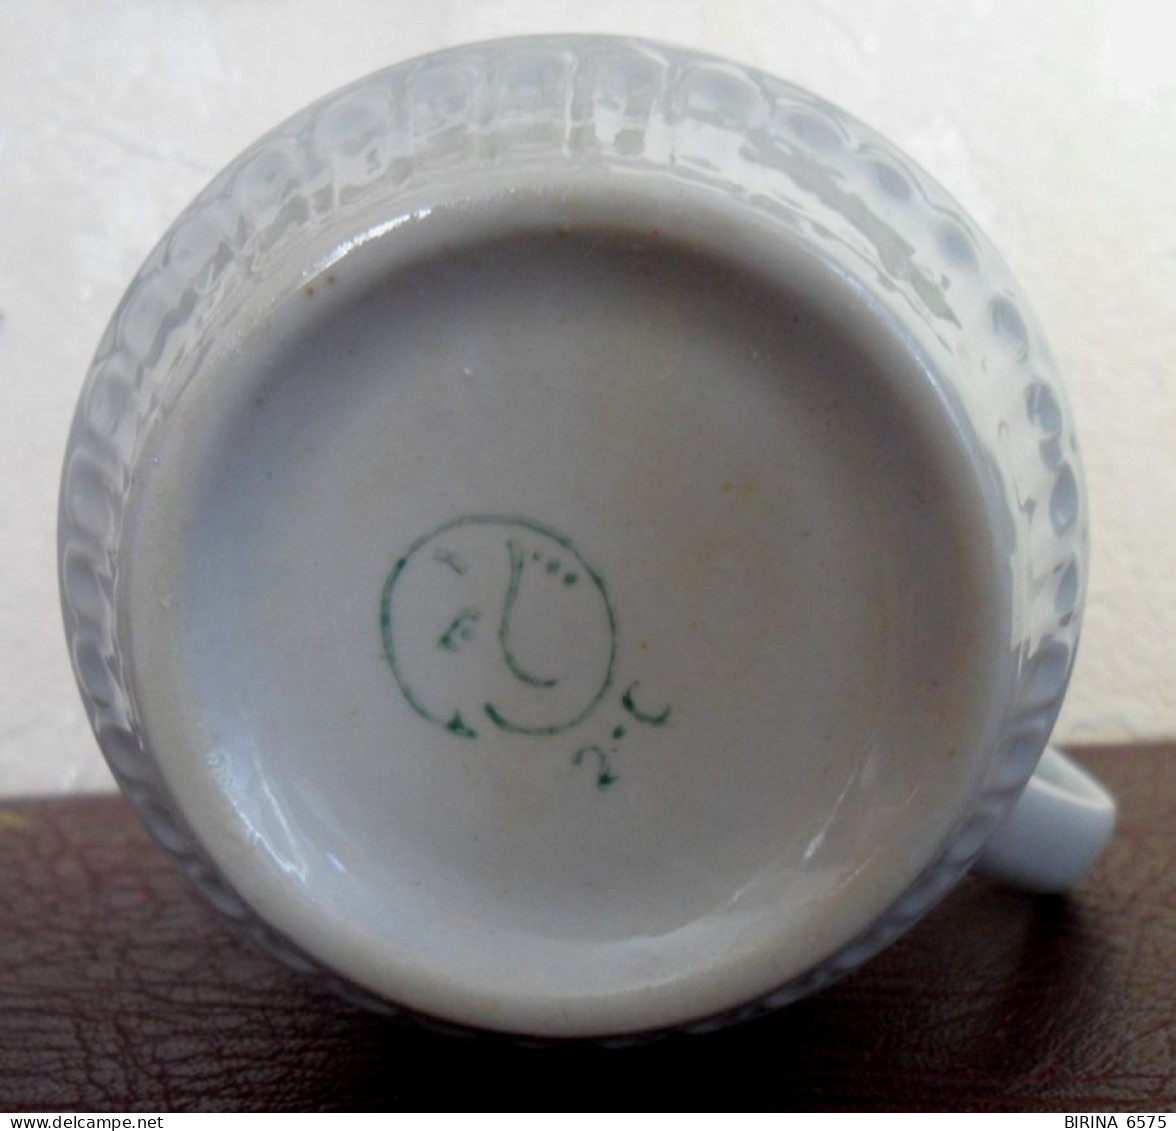 A Cup. Cup. Shepherd. Sheep. TERNOPIL PORCELAIN FACTORY. USSR. - 8-50-i - Tazze